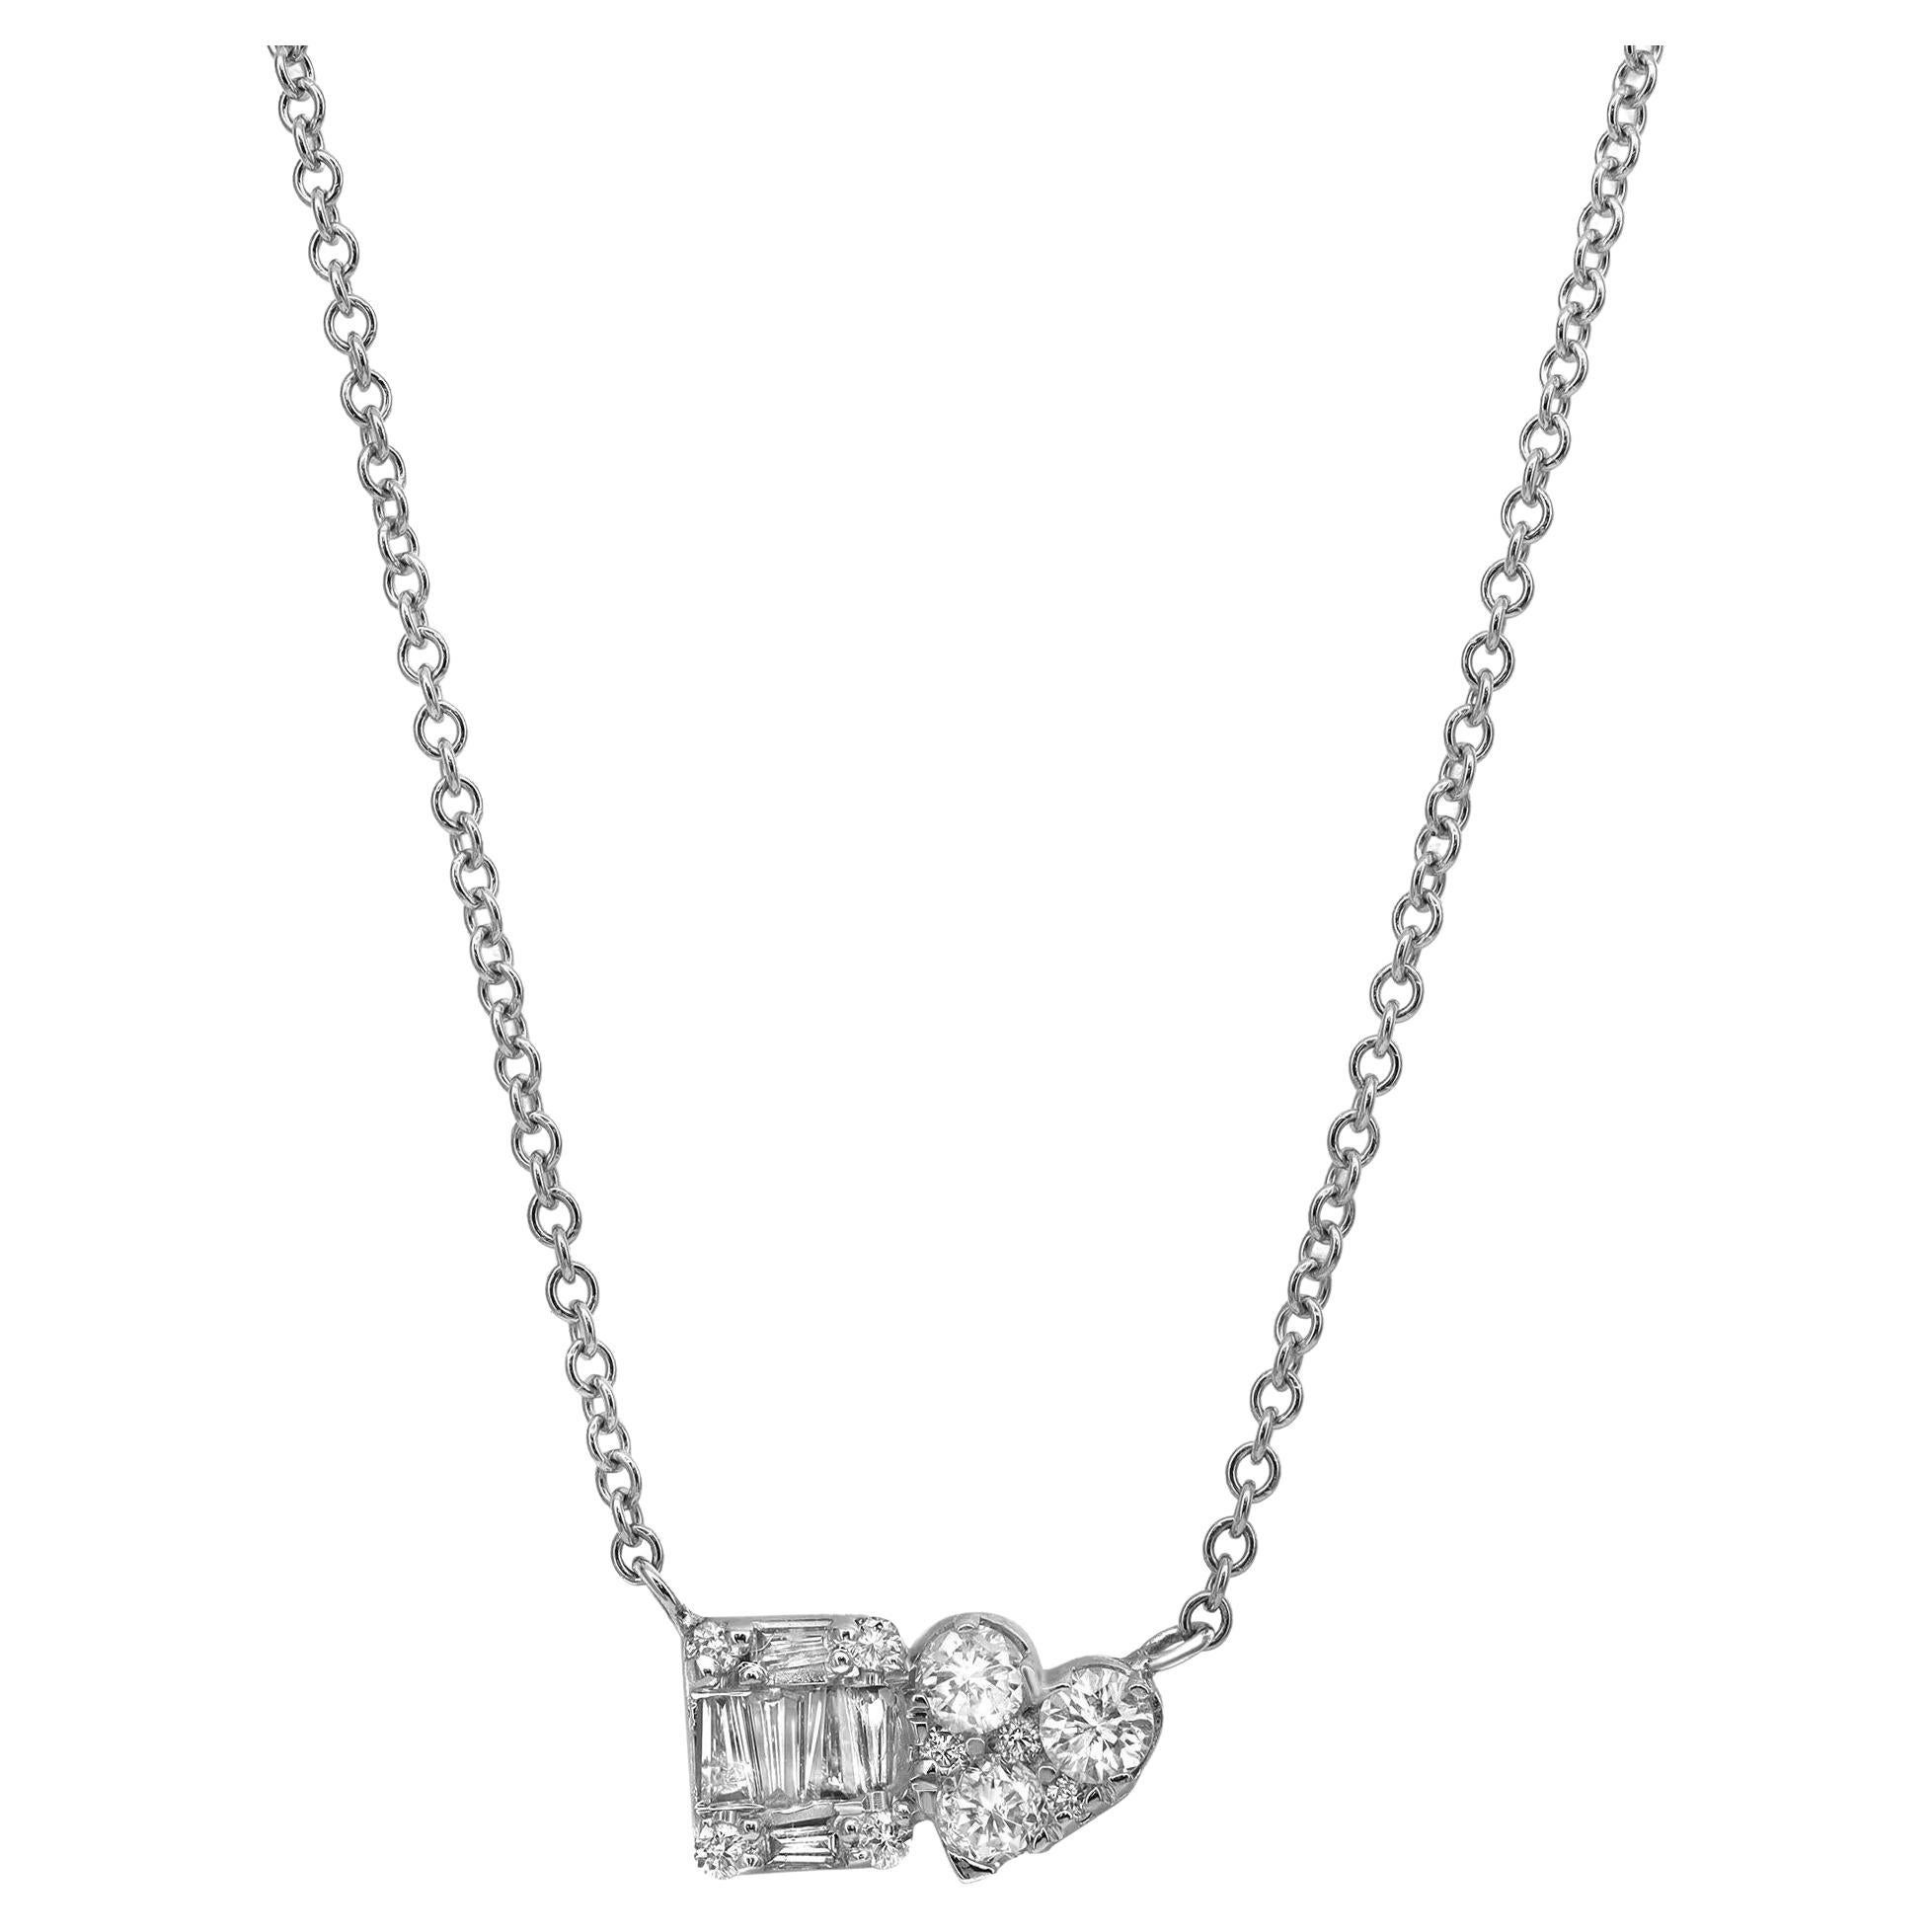 Baguette And Round Cut Diamond Pendant Necklace 14K White Gold 0.44Cttw For Sale